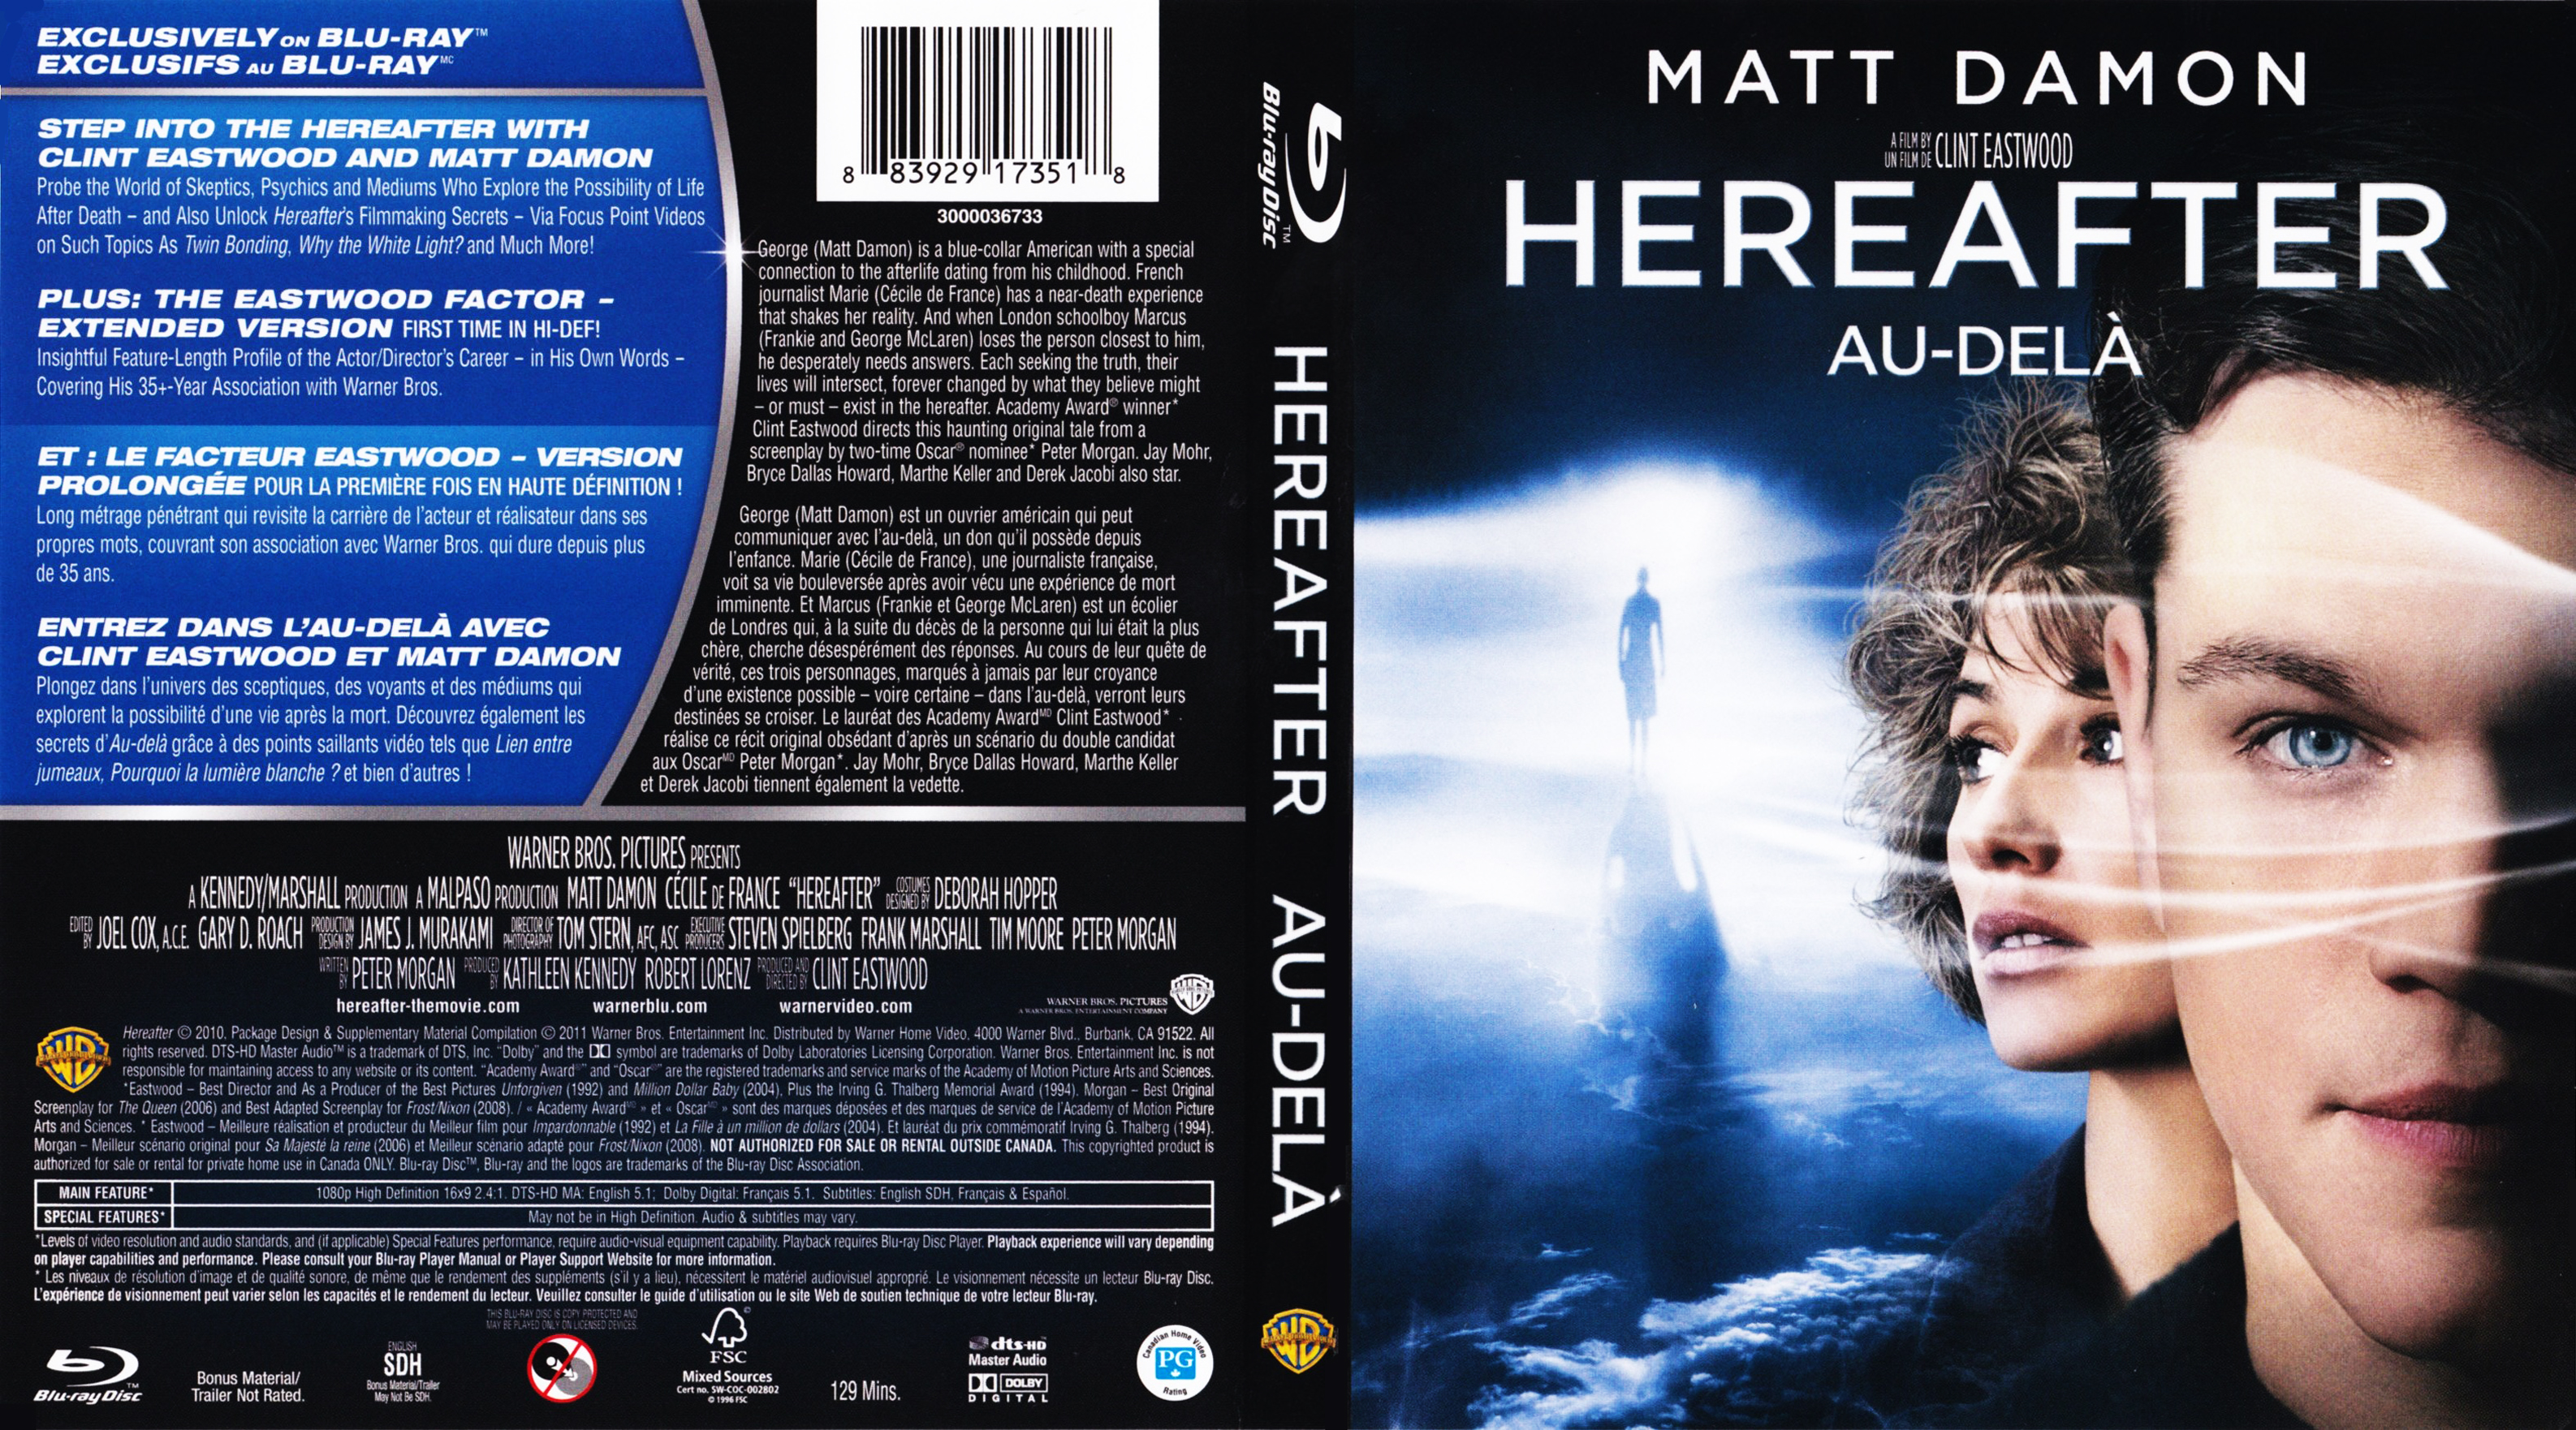 Jaquette DVD Hereafter - au-dela (Canadienne) (BLU-RAY)